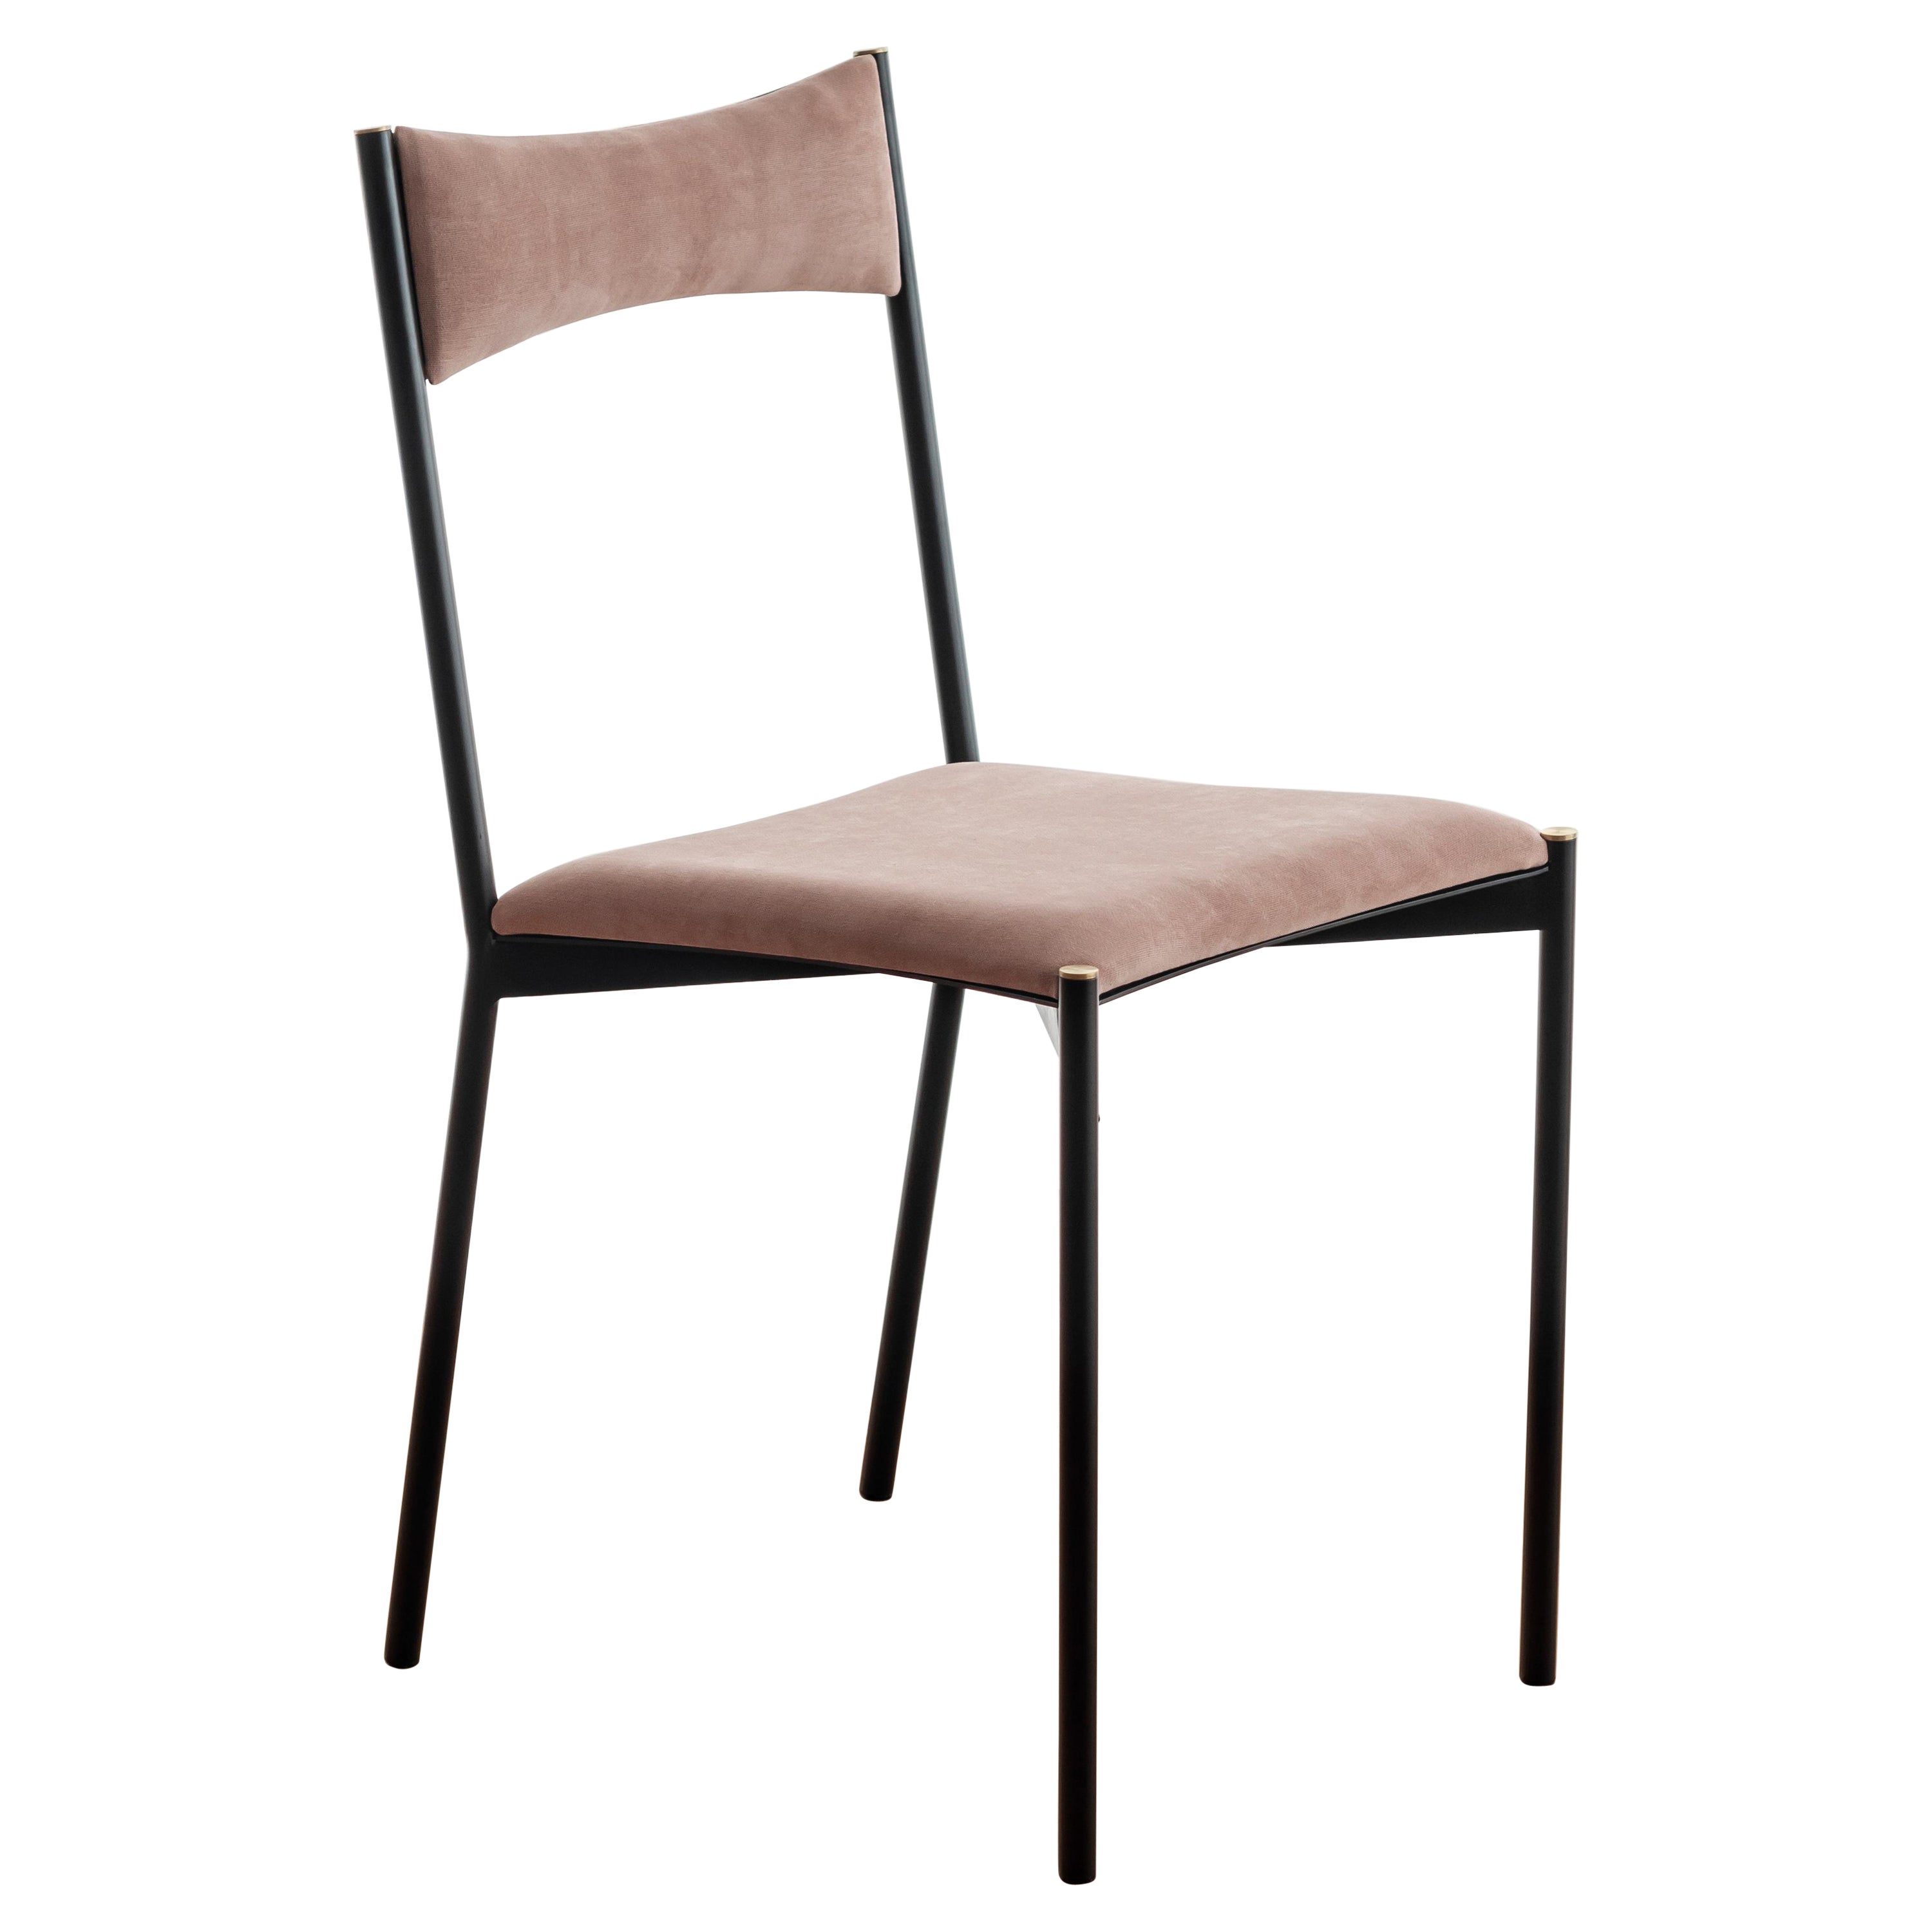 Tensa Chair, Pink by Ries